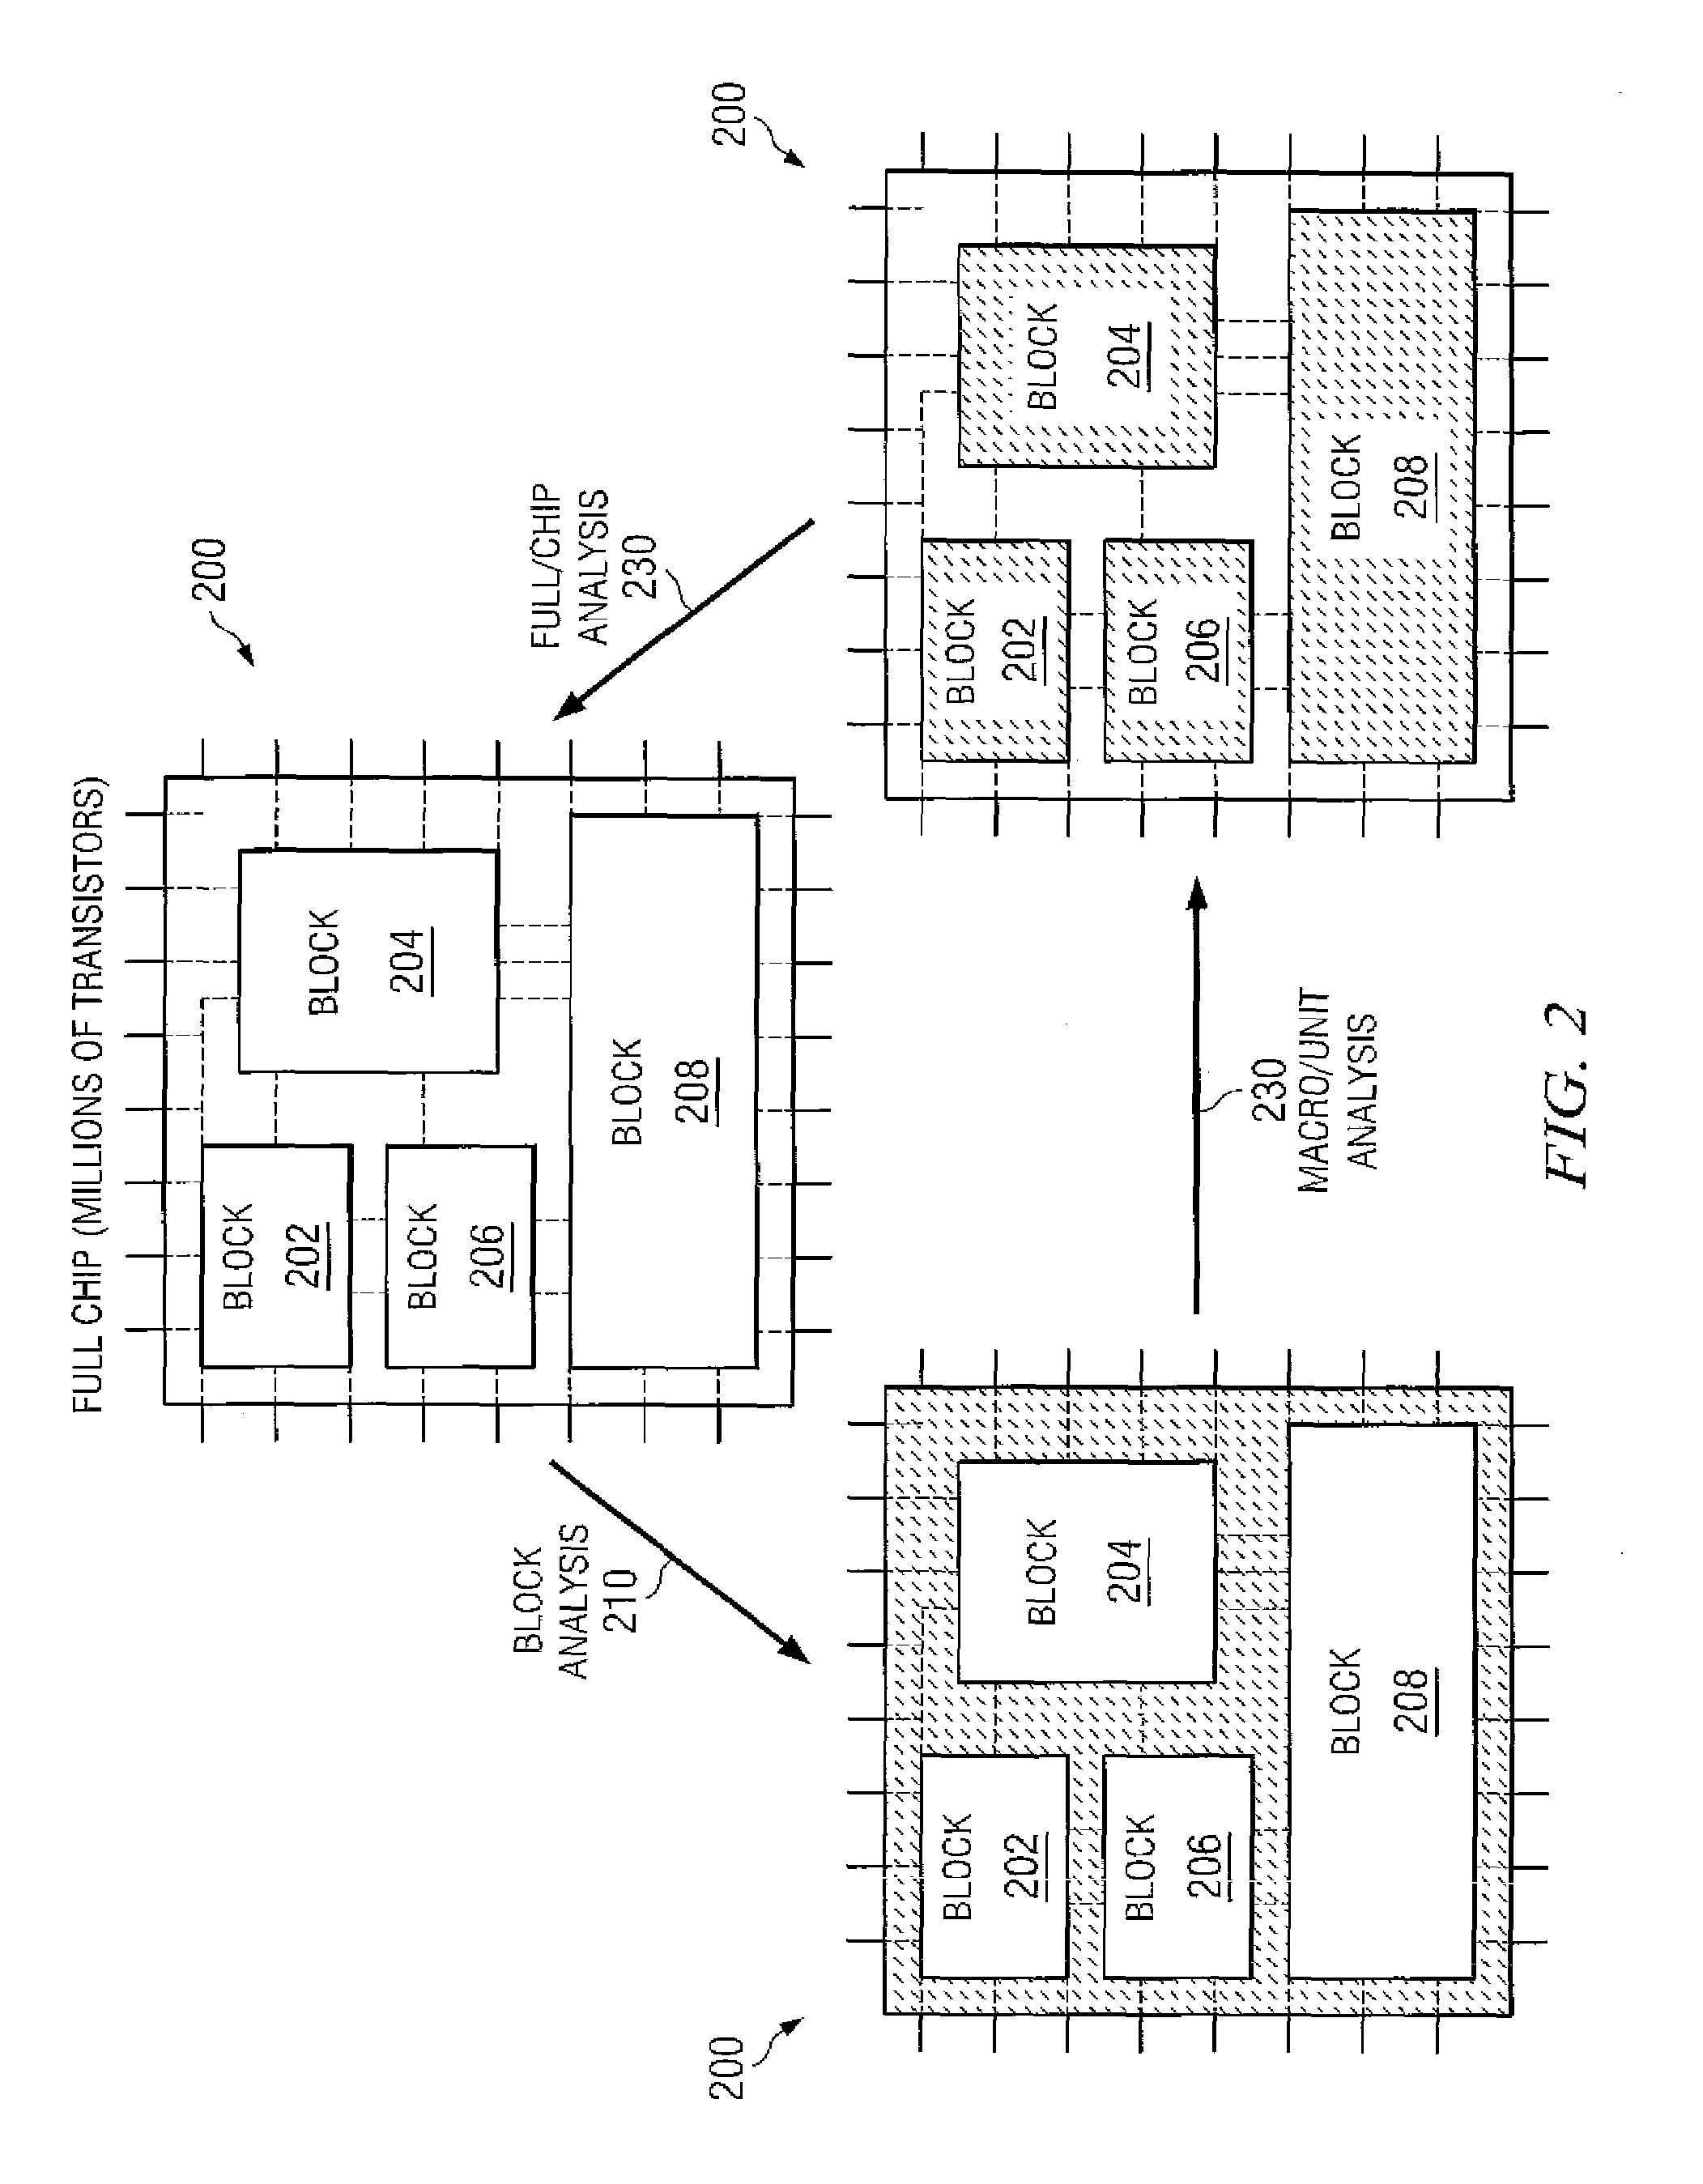 System and method for circuit noise analysis